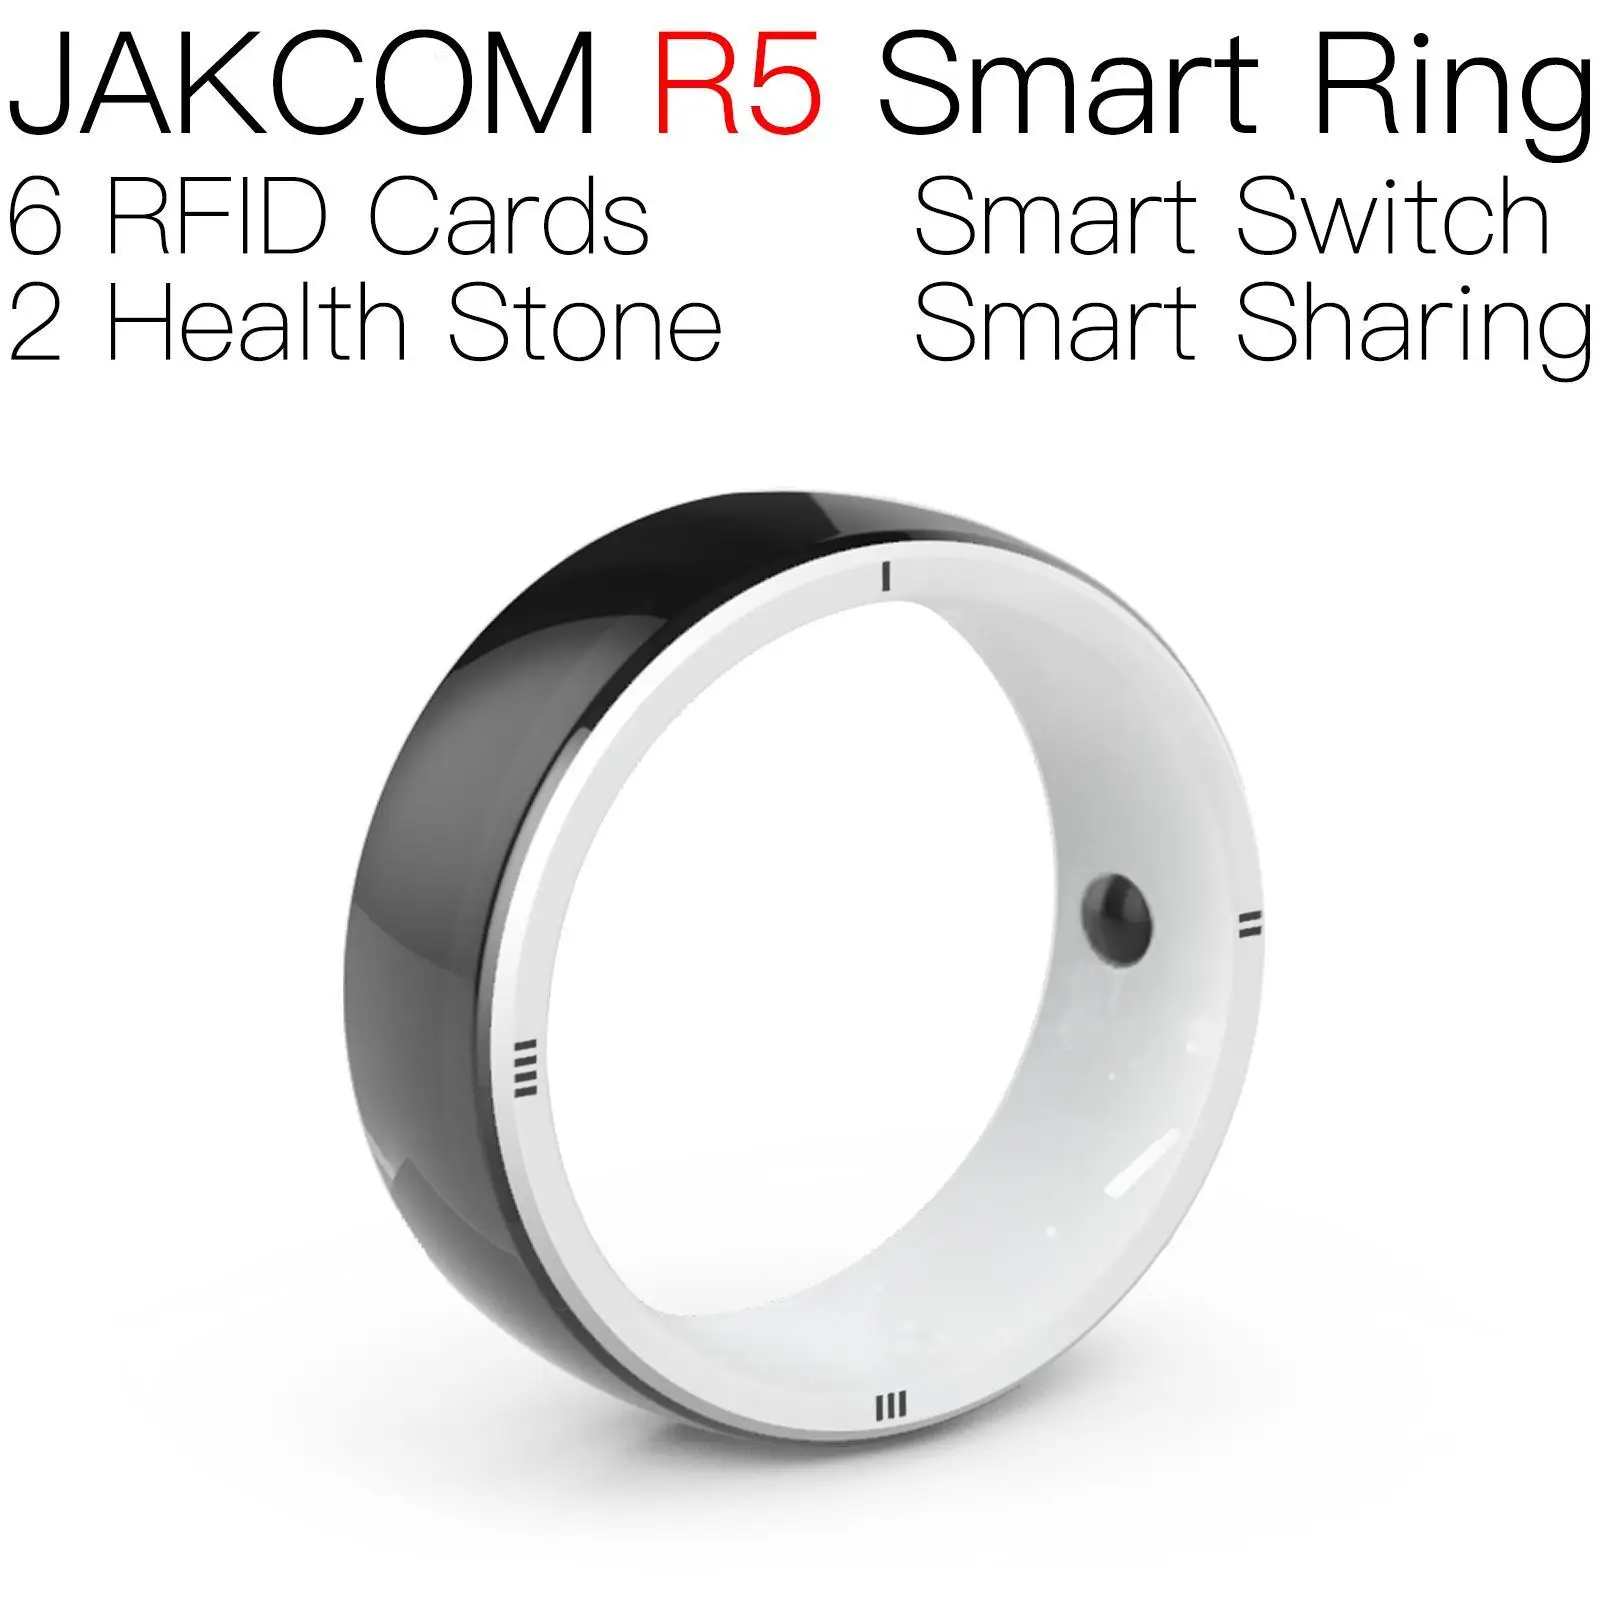 

JAKCOM R5 Smart Ring Super value than escapement time hand held metal carver nfc tag uid modifiable 255psi chip